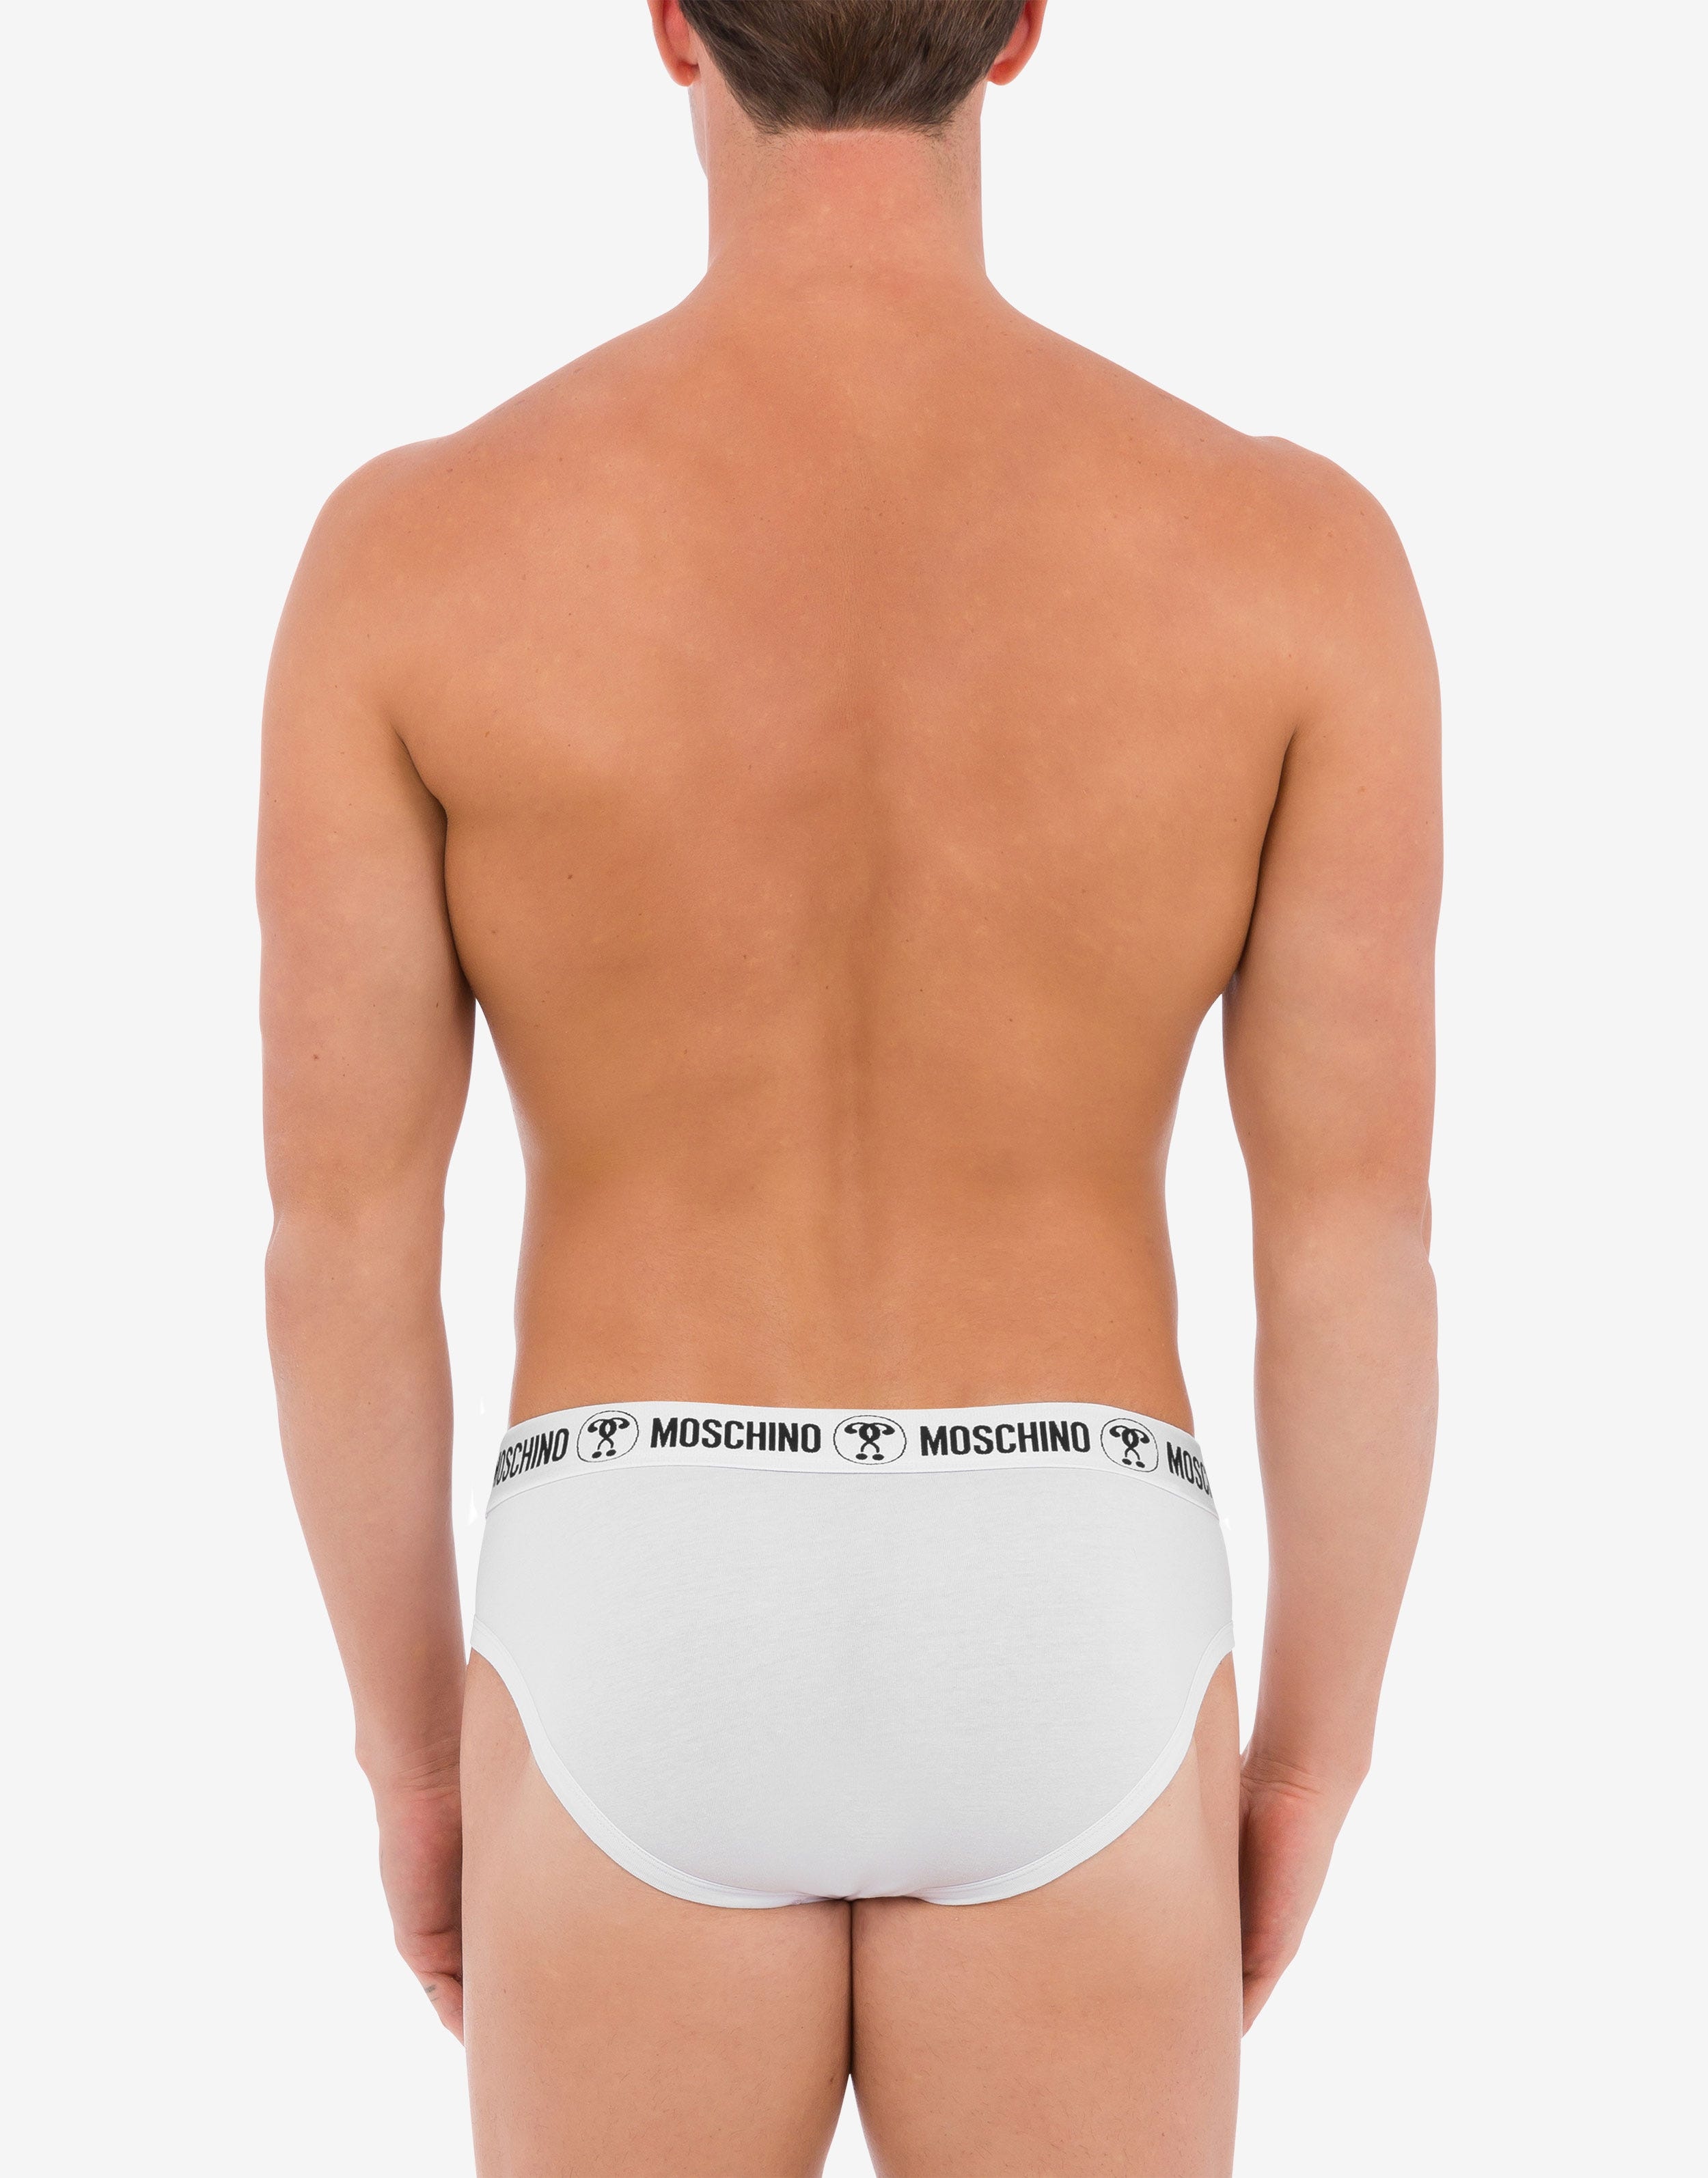 DOUBLE QUESTION MARK JERSEY BRIEFS - 3